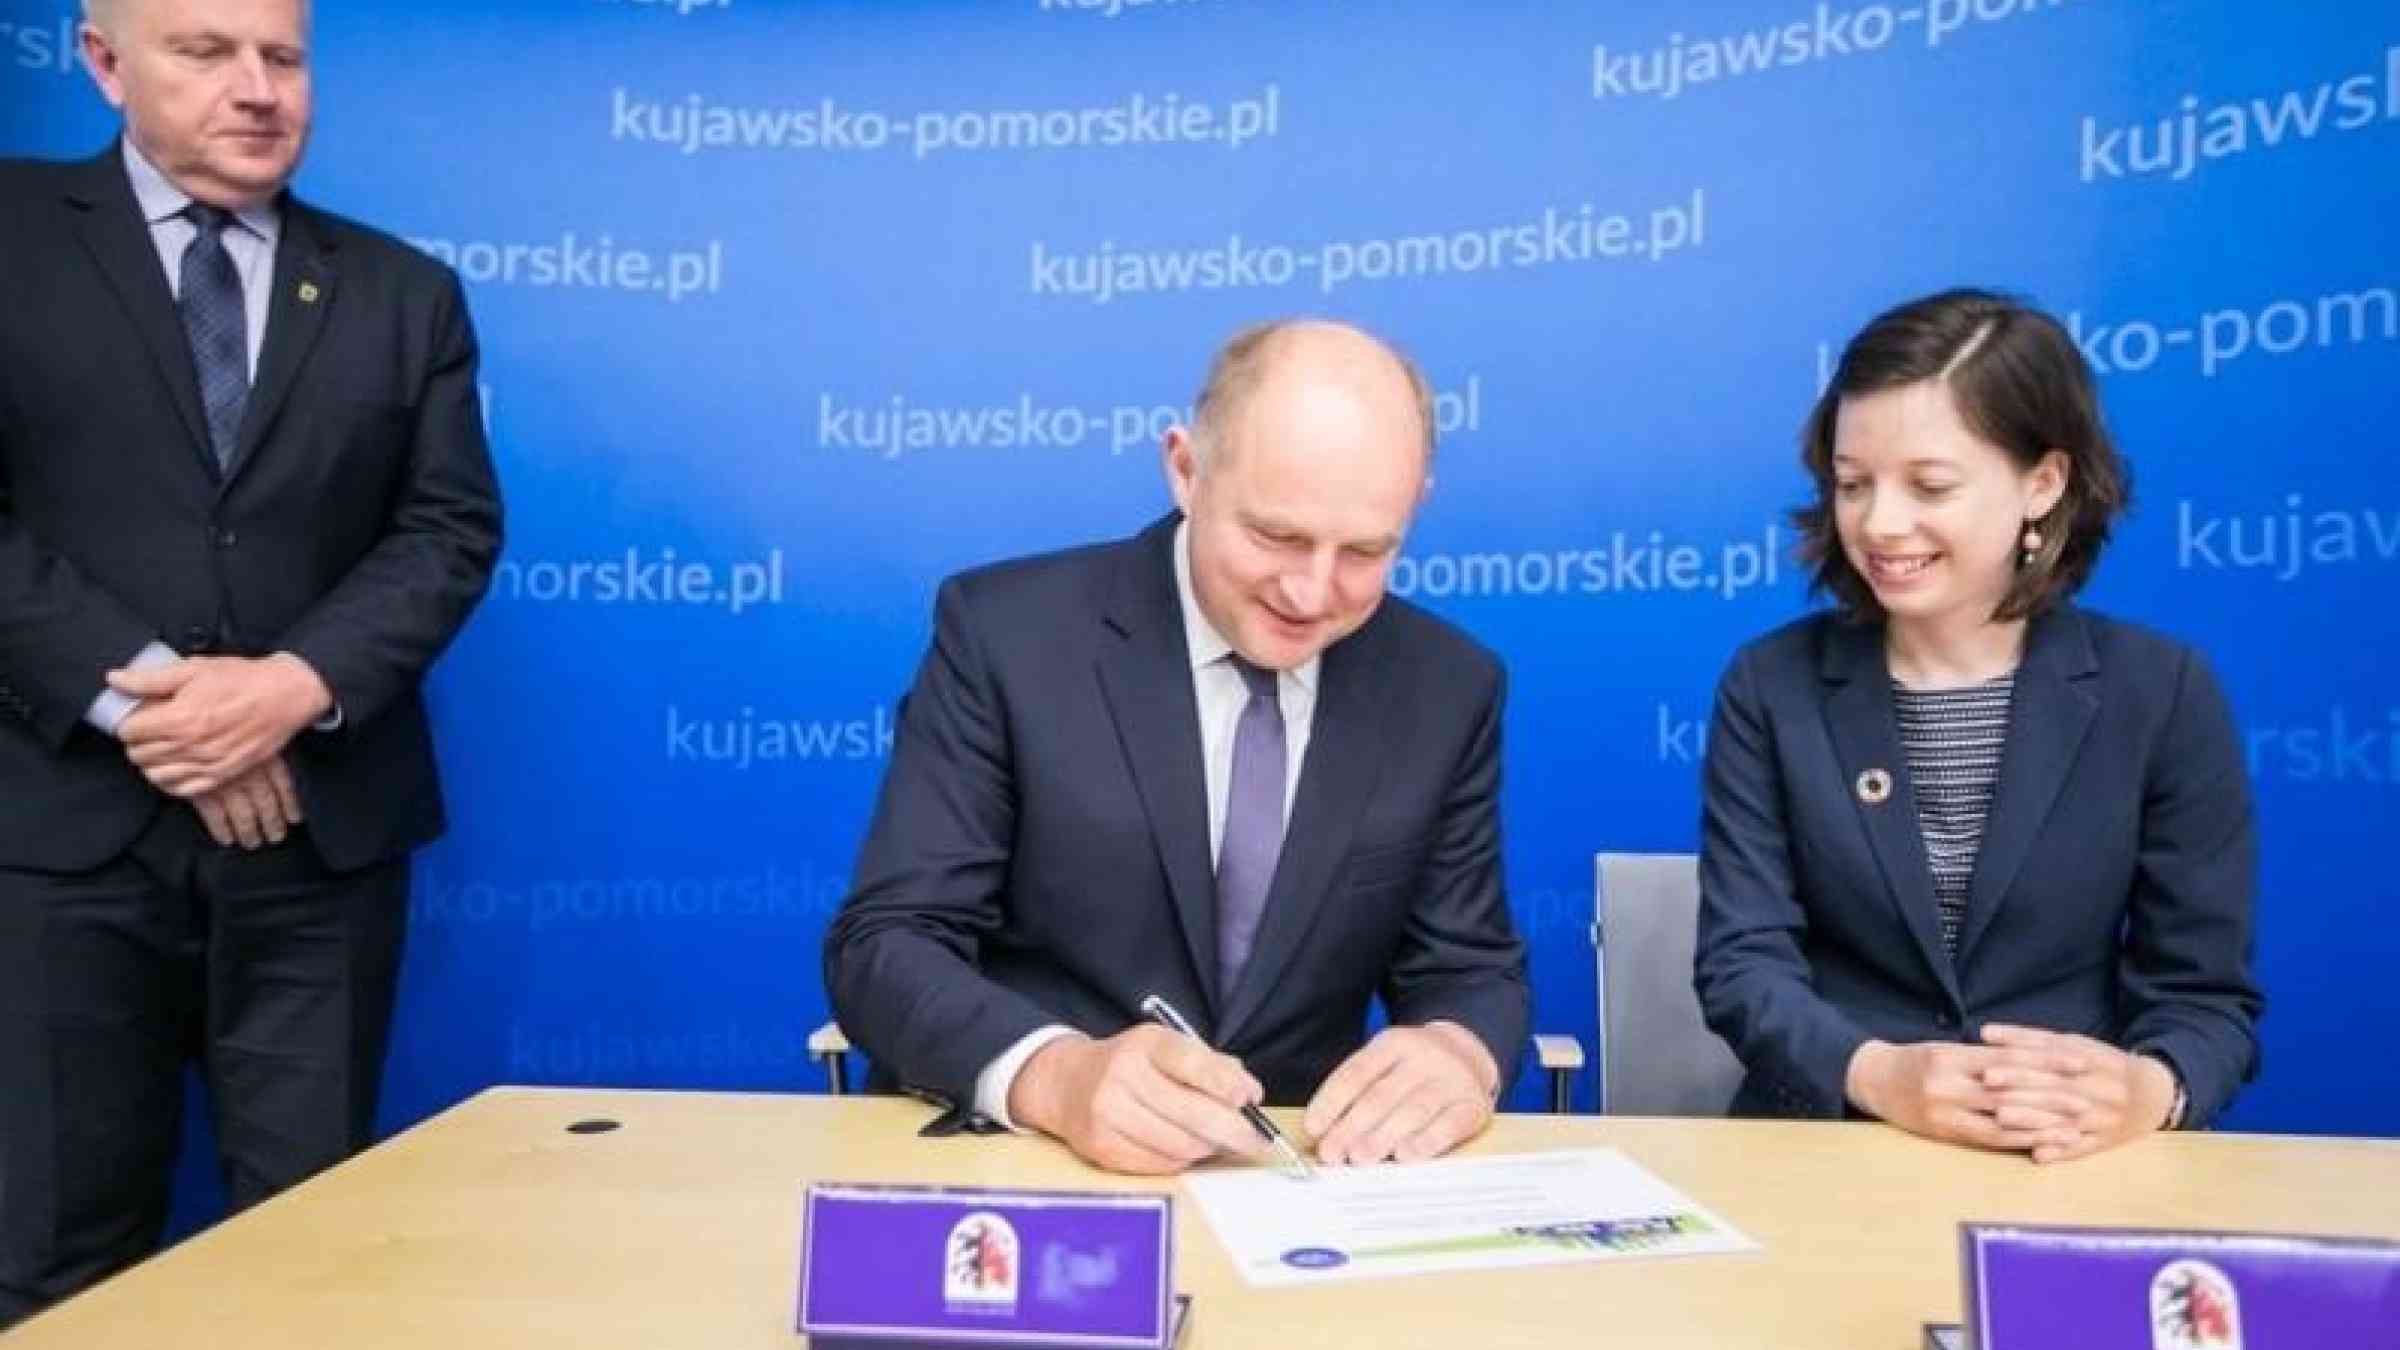 At a signing ceremony in Toruń, the Marshall of the Kujawsko-Pomorskie Region, Mr. Piotr Calbecki, and Ms. Rosalind Cook, of UNISDR's Regional Office for Euroope